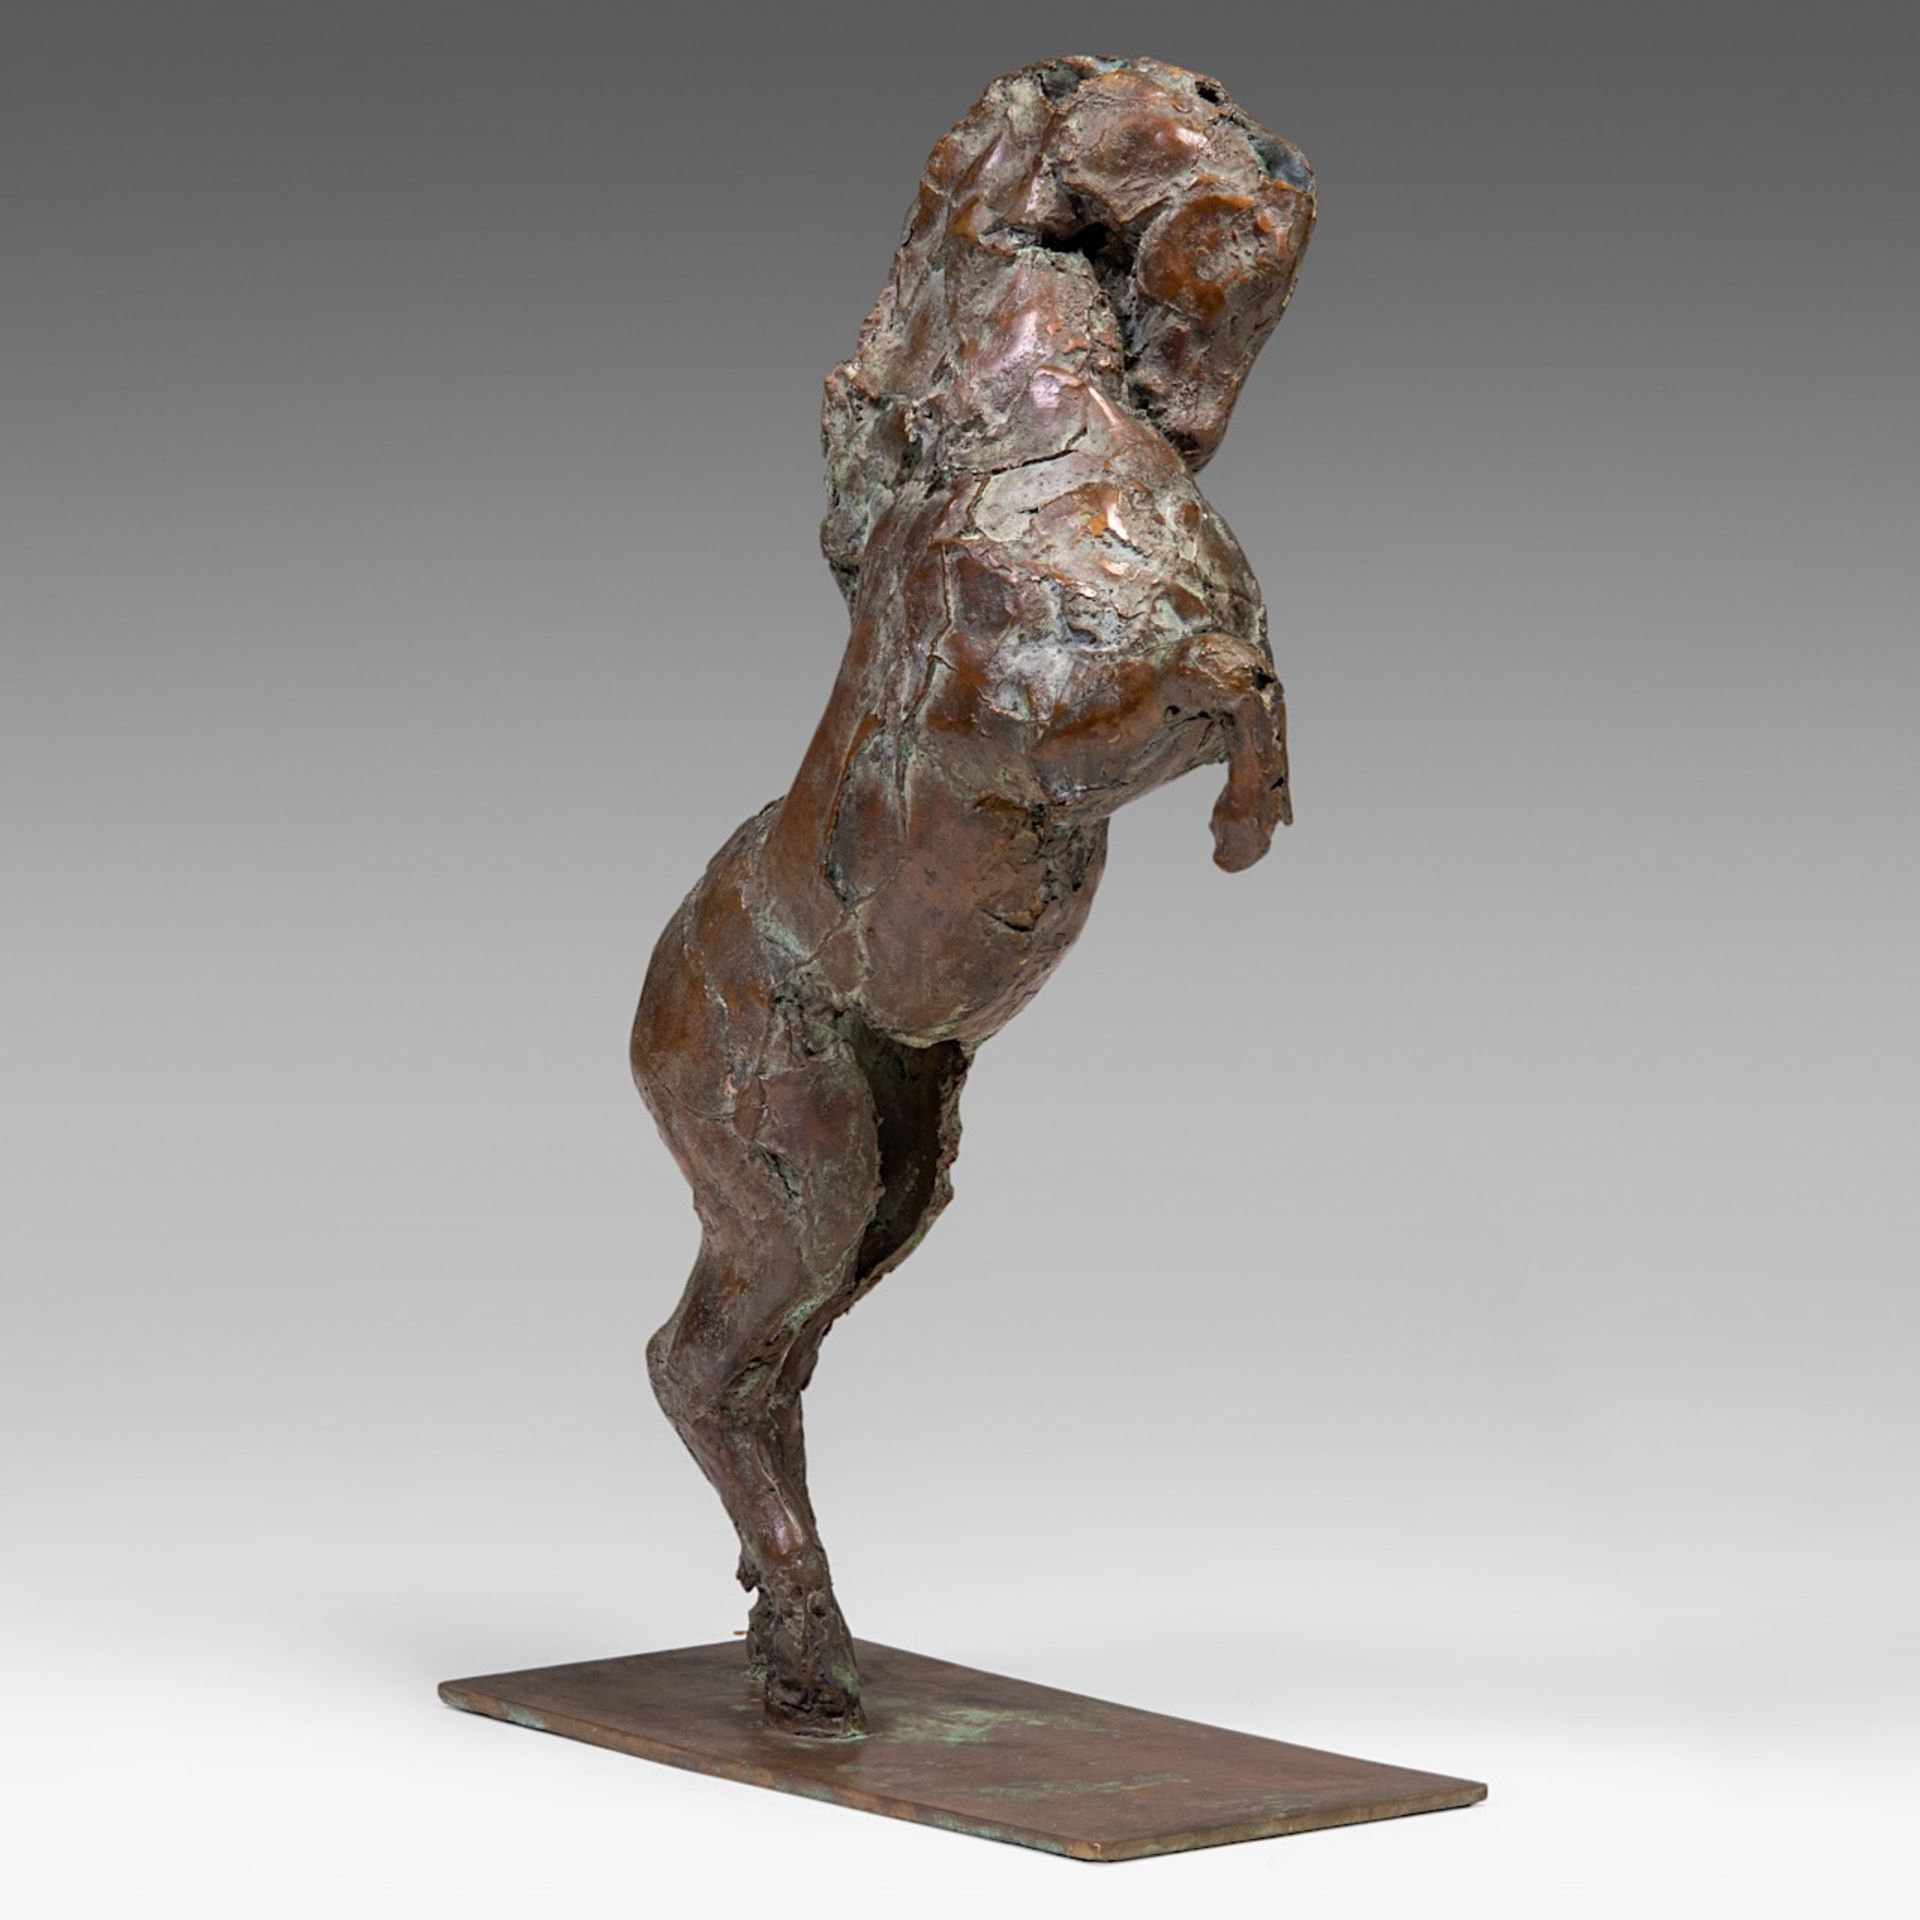 Jan Desmarets (1961), rearing horse, patinated bronze, 4/8 76 x 44.5 cm. (29.9 x 17.5 in.) - Image 5 of 7